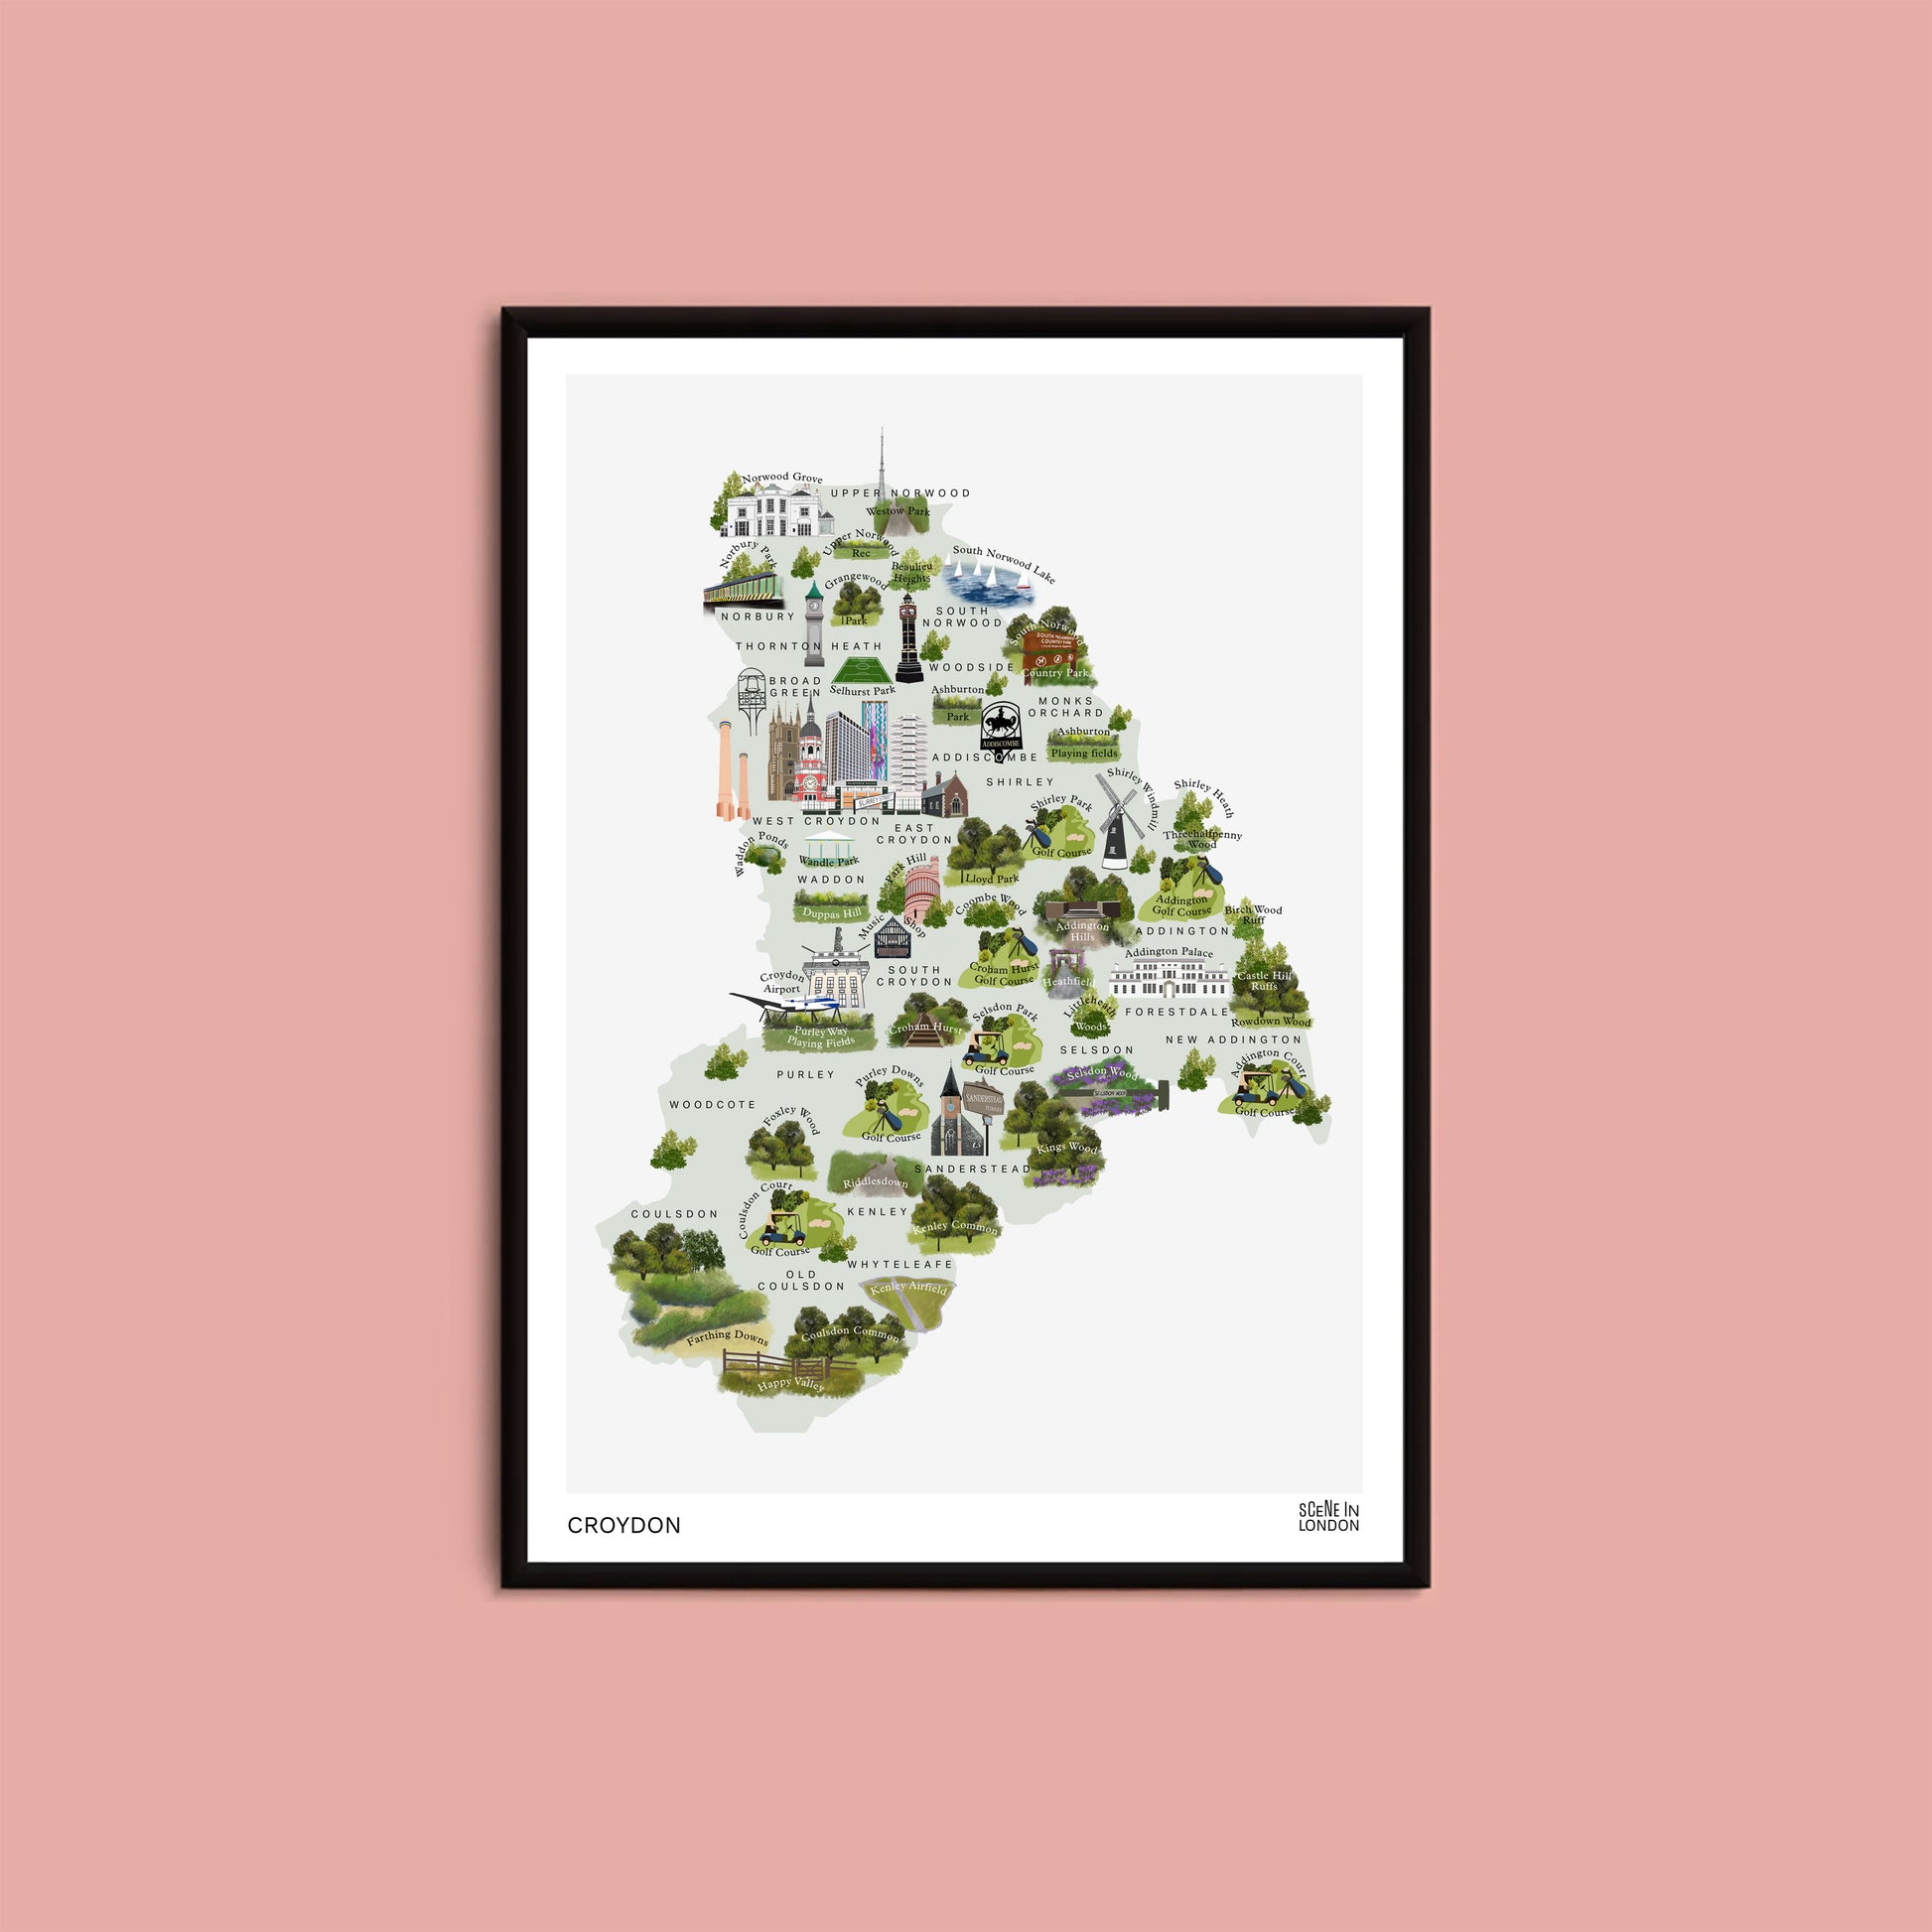 Croydon map print with places in Croydon